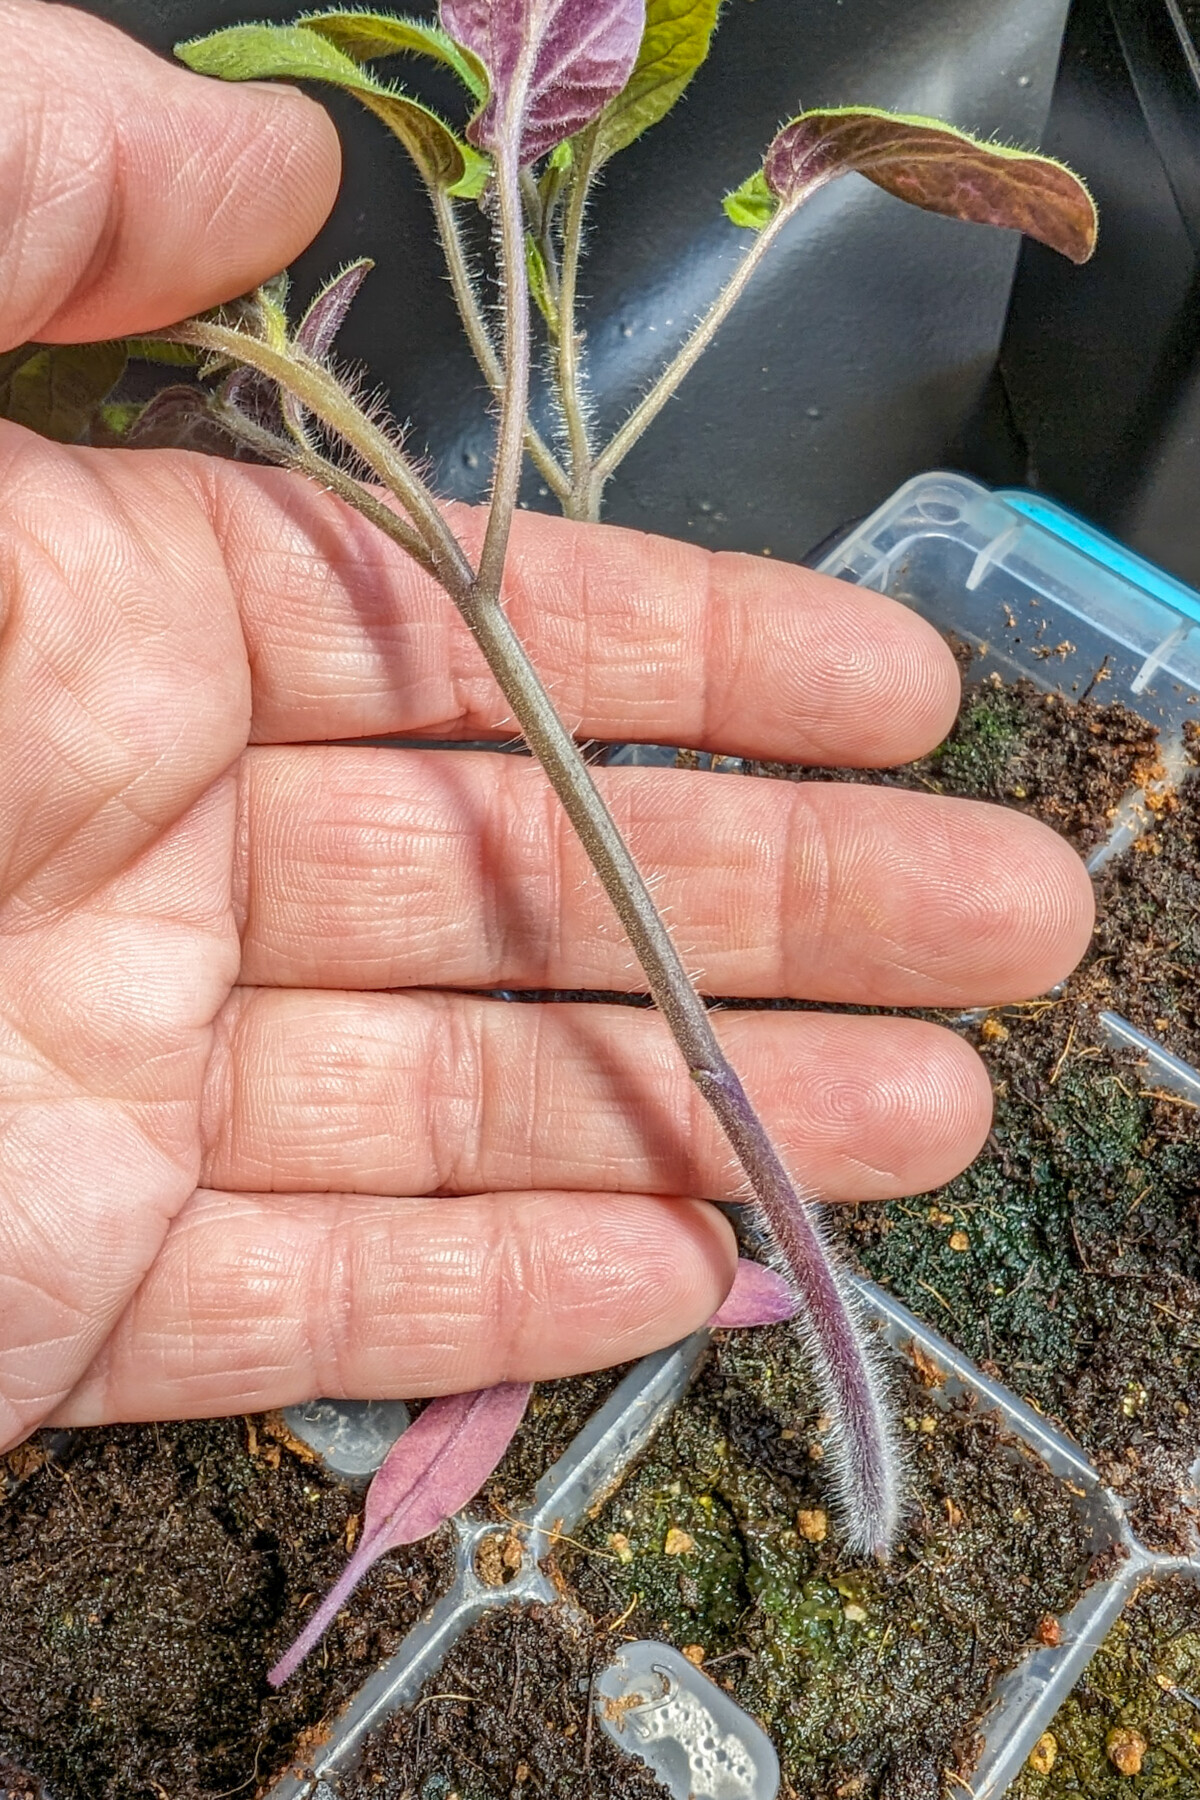 Fingers holding a tomato seedling stem that is recovering from phosphorous deficiency